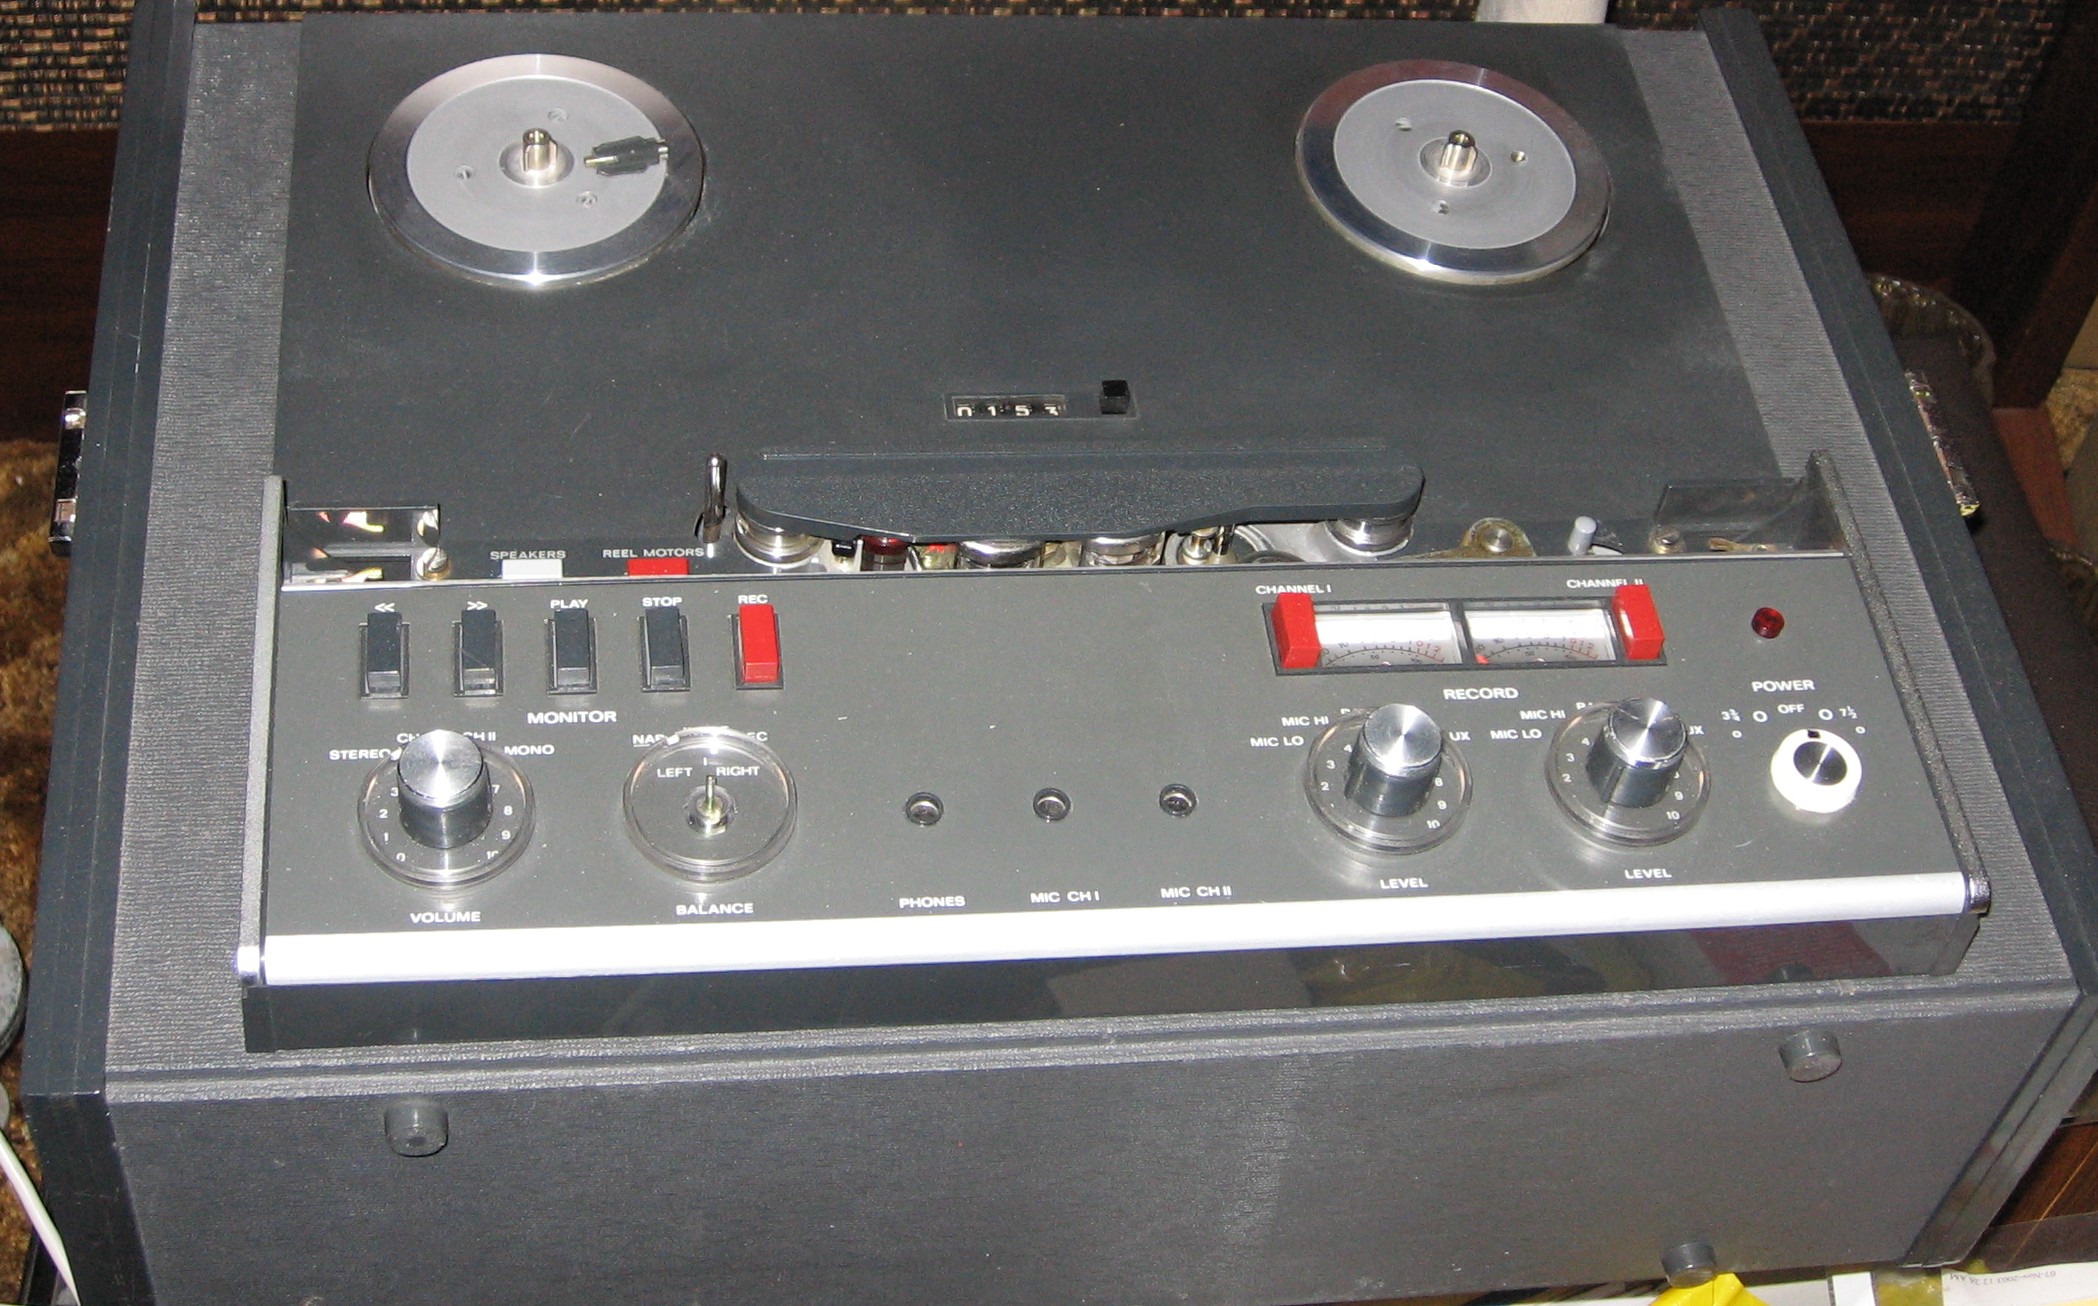 Wanted: Parts for Revox A77 reel-to-reel tape deck